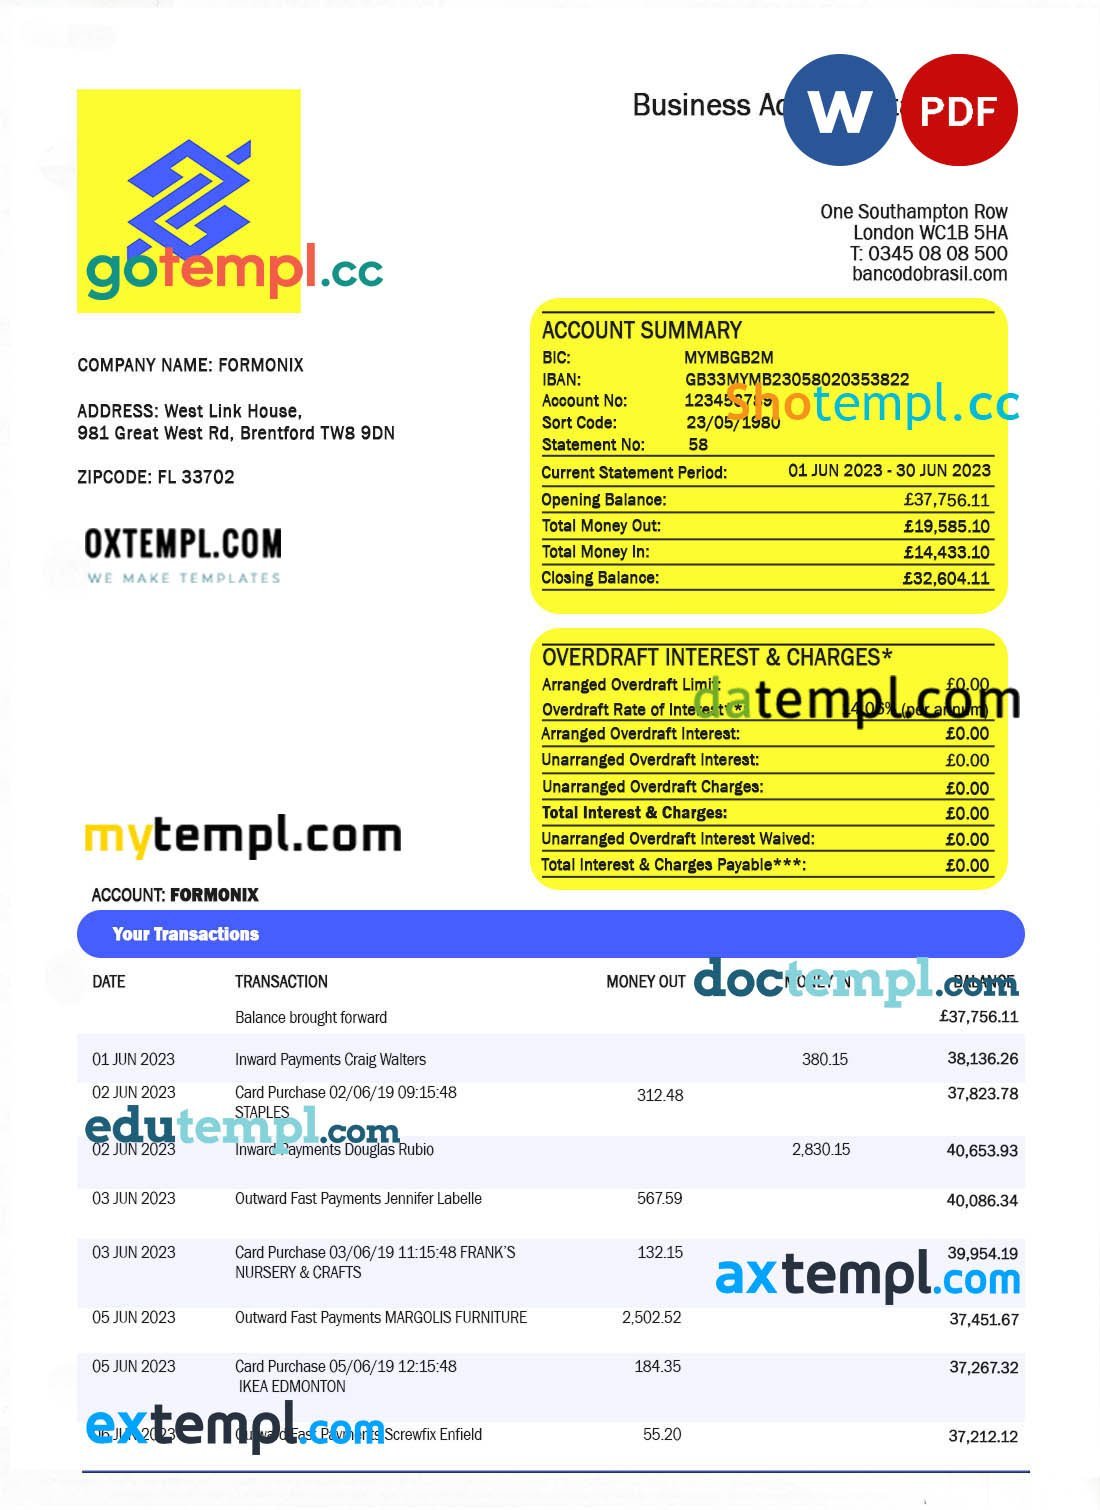 Axos Bank firm account statement Word and PDF template